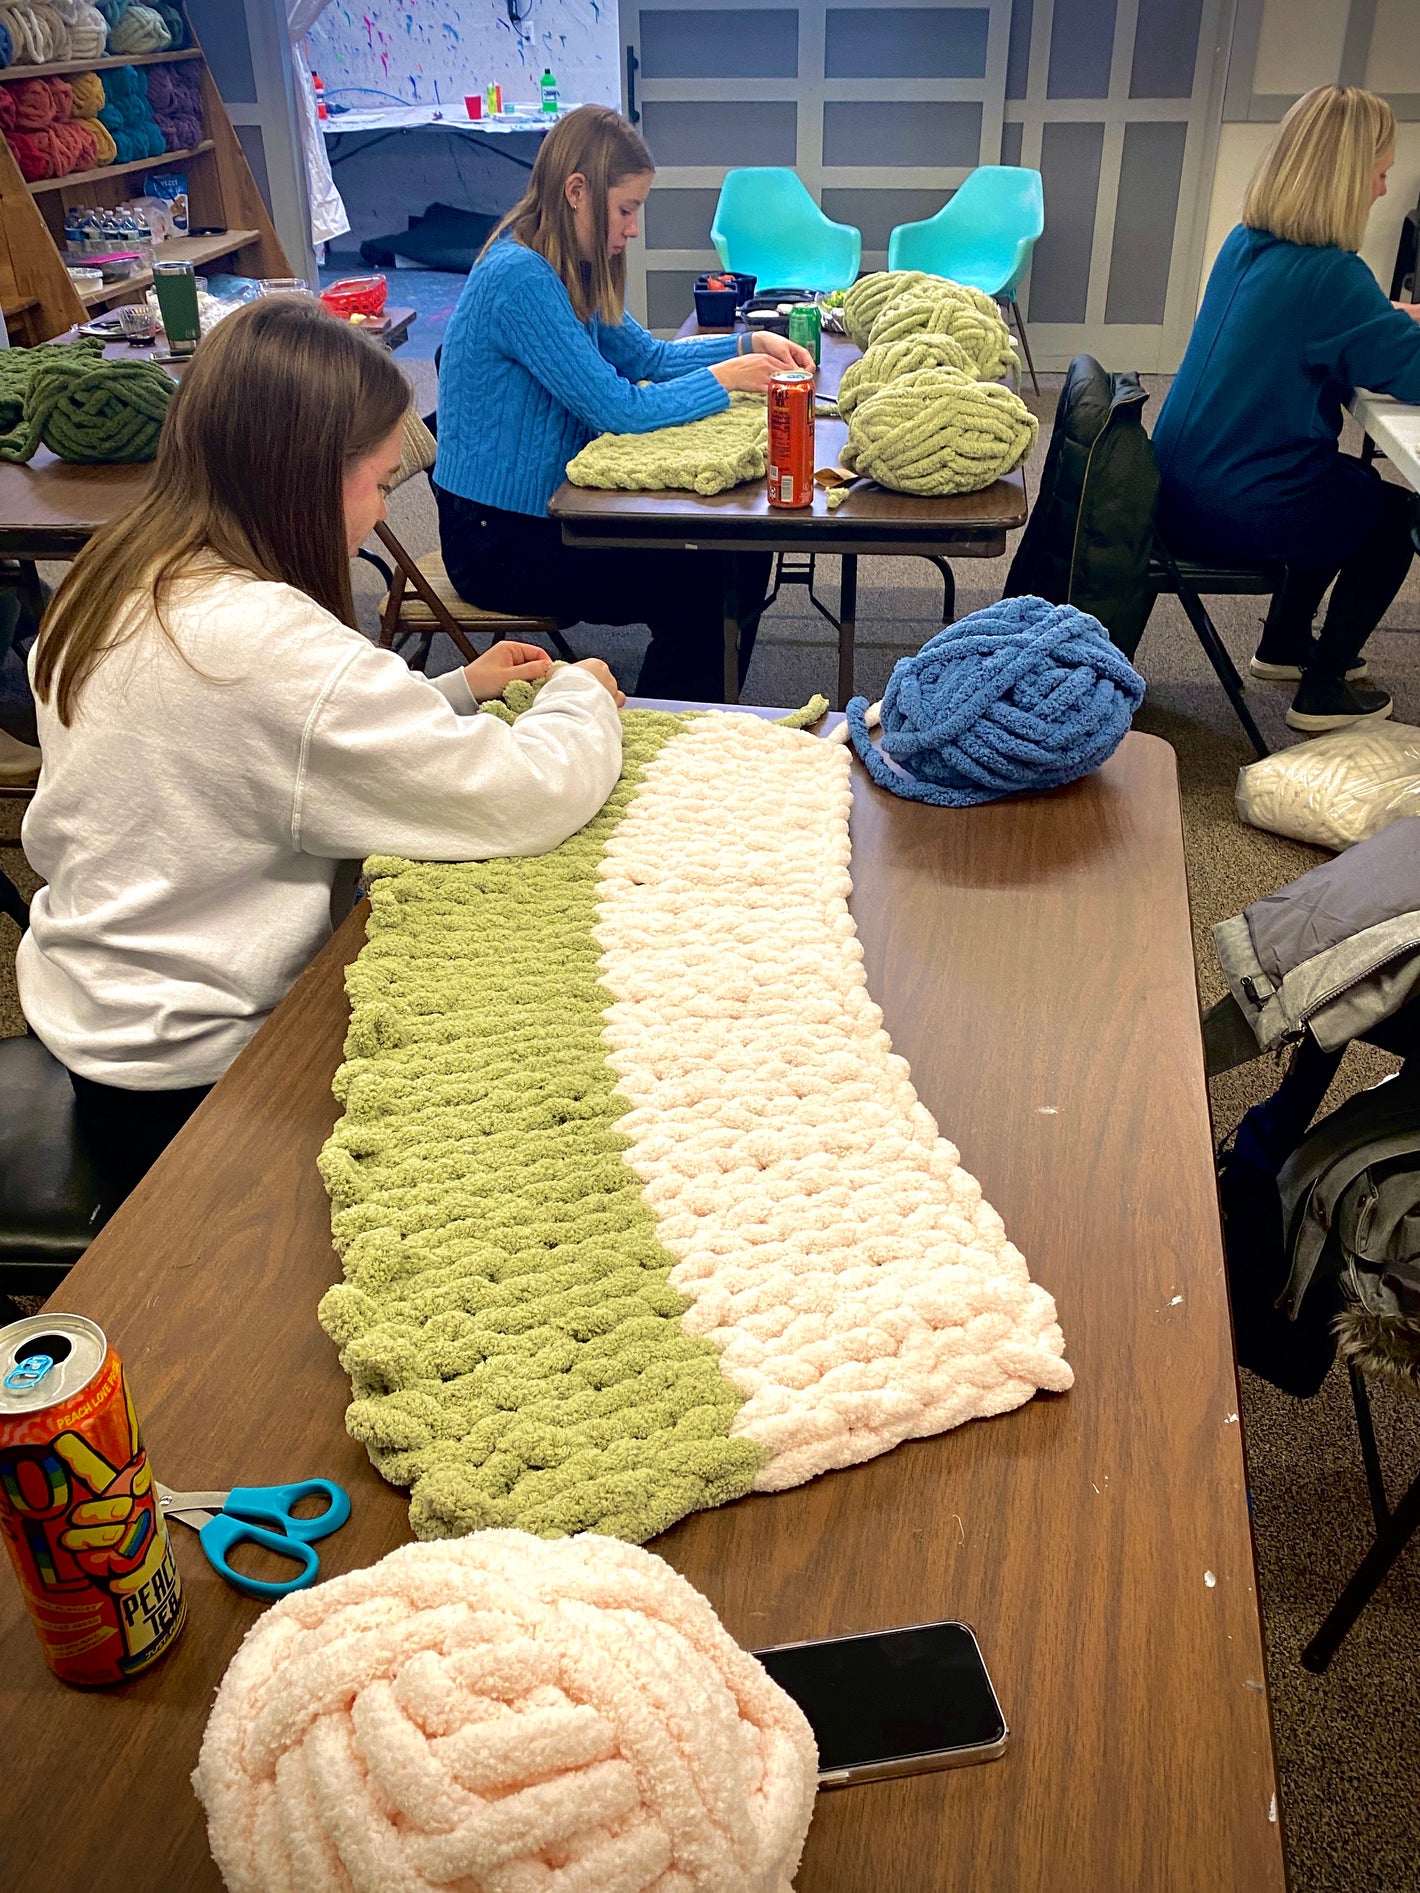 Our blanket classes are so fun, easy, and cozy!